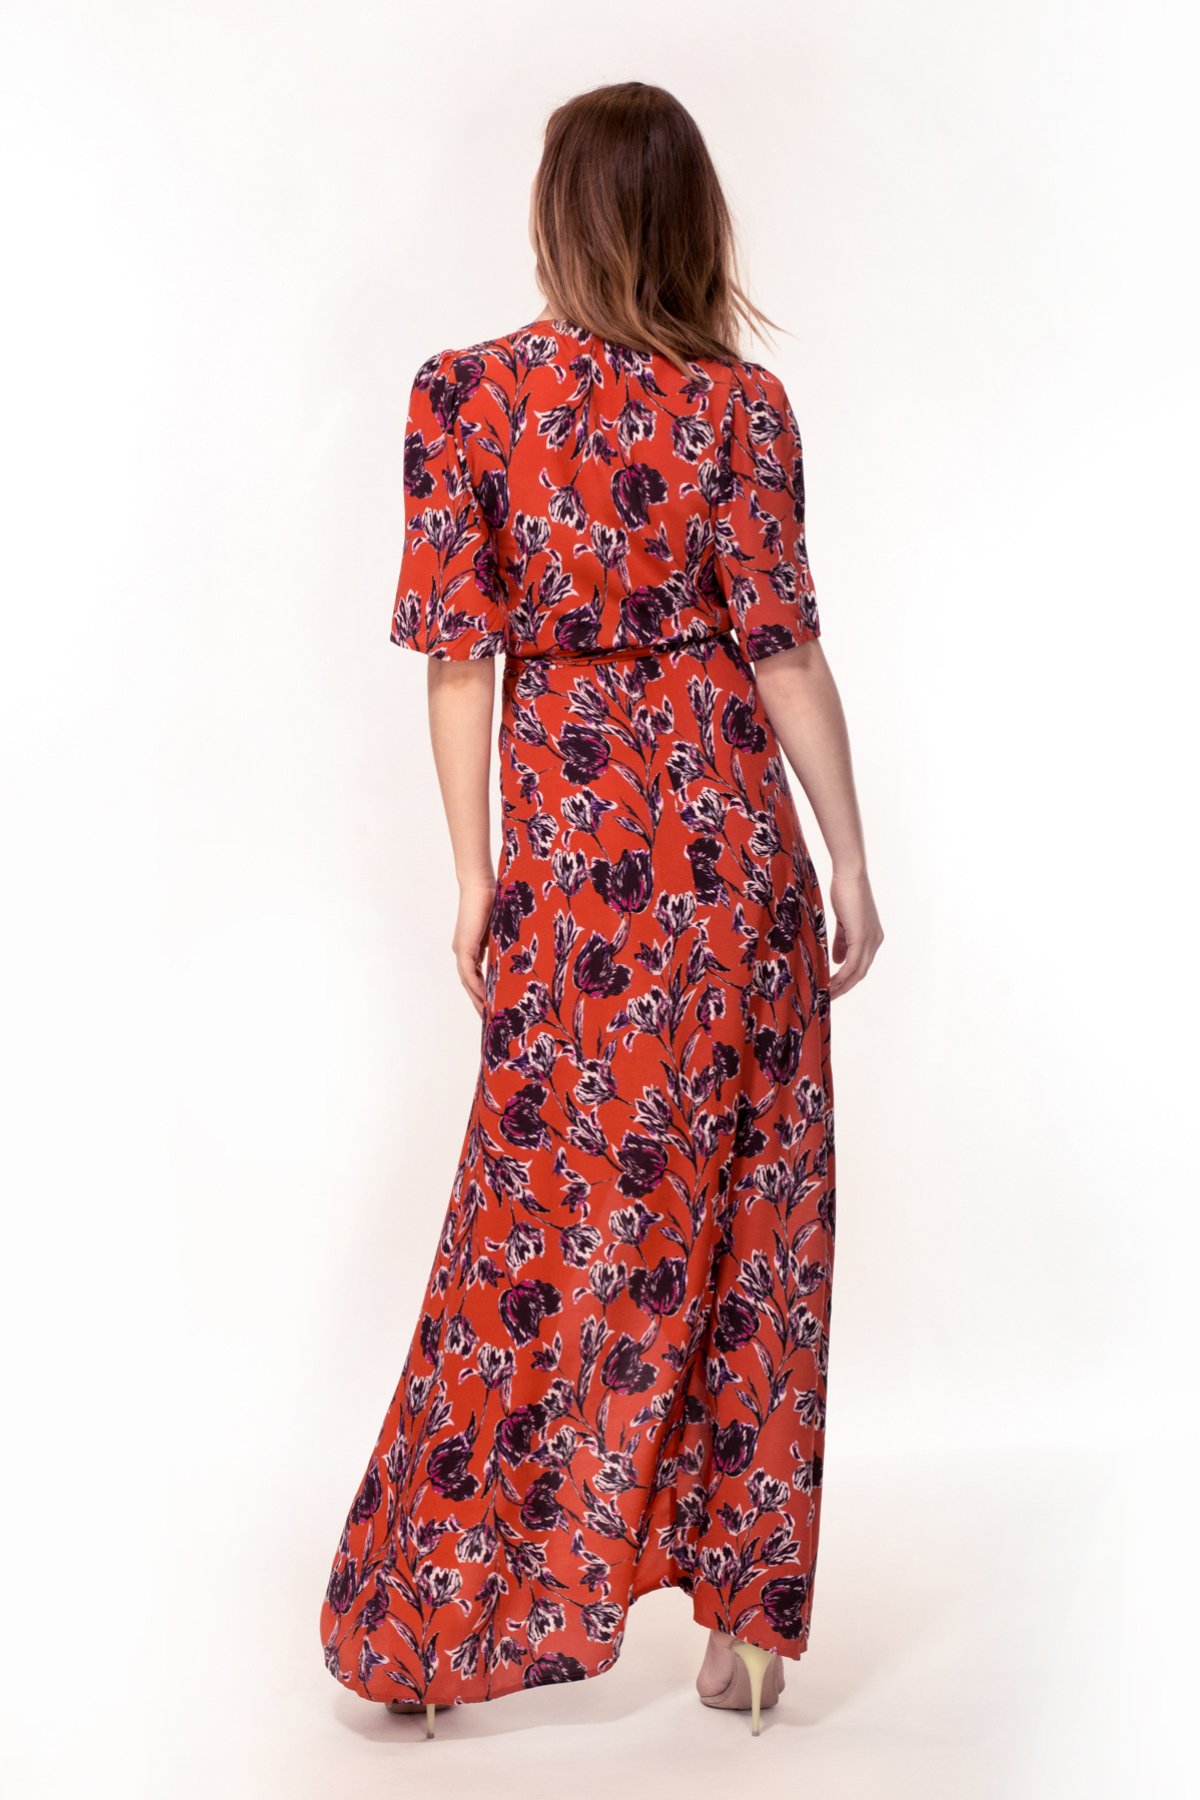 Hide the Label Rosa Wrap Maxi Dress in Peach Floral Print, available on ZERRIN